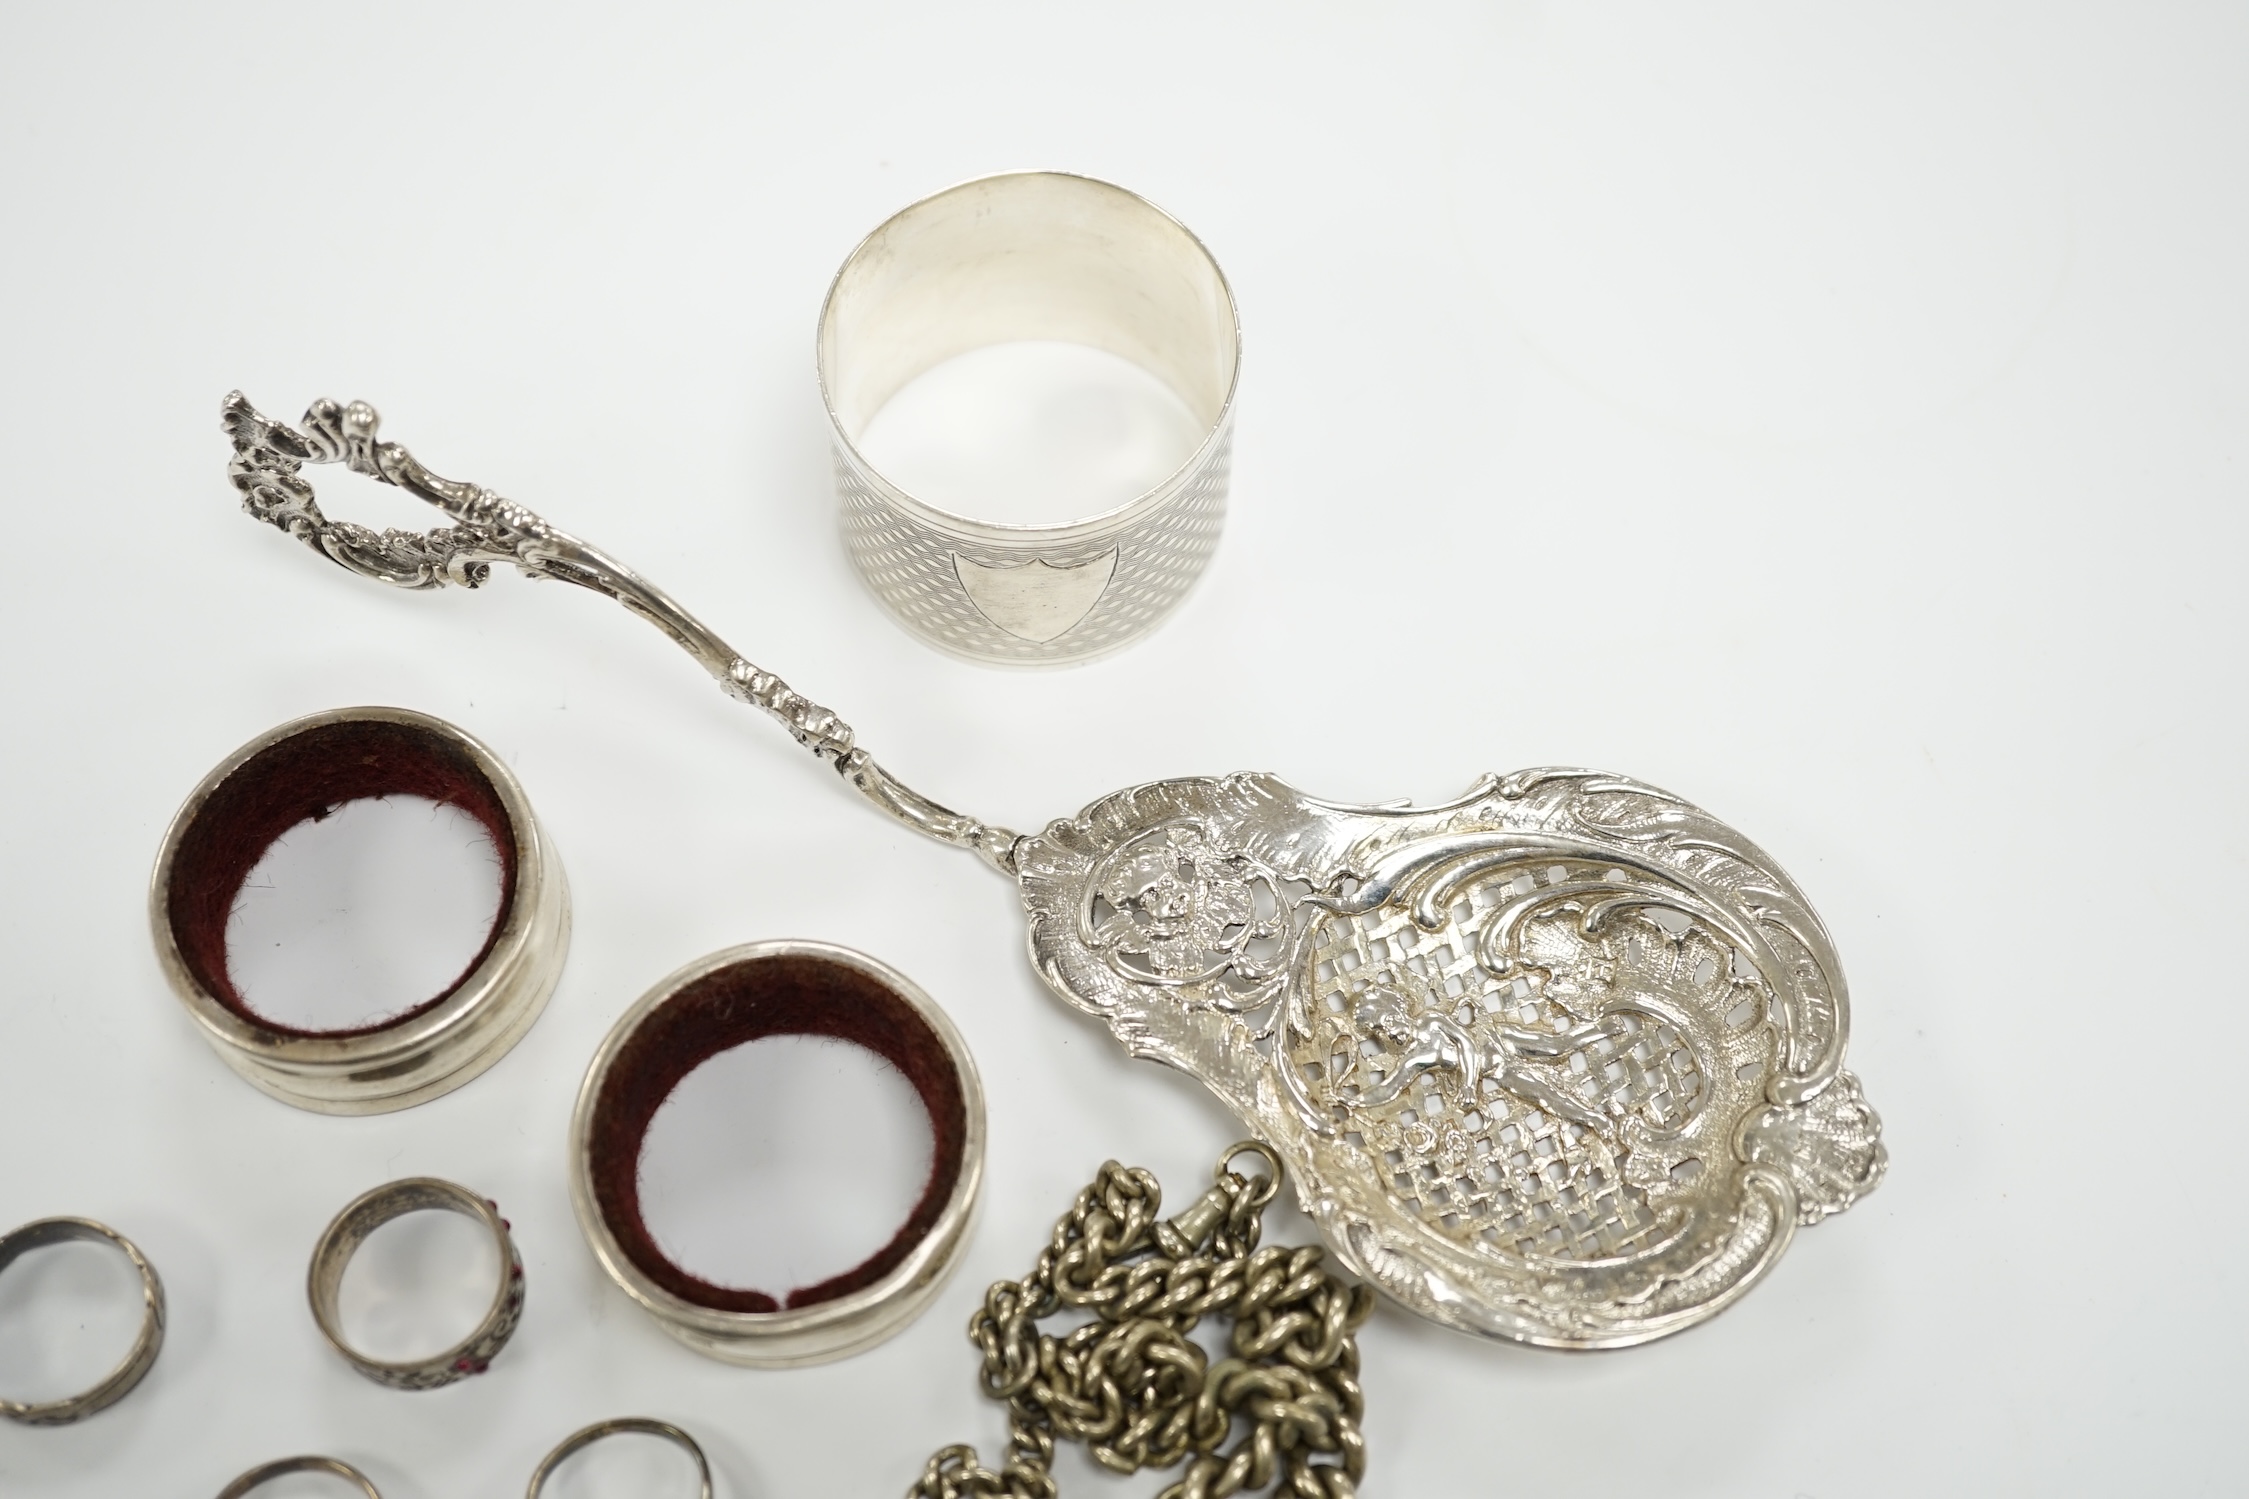 Sundry small silver and white metal items including, napkin ring, continental pierced spoon, etc.